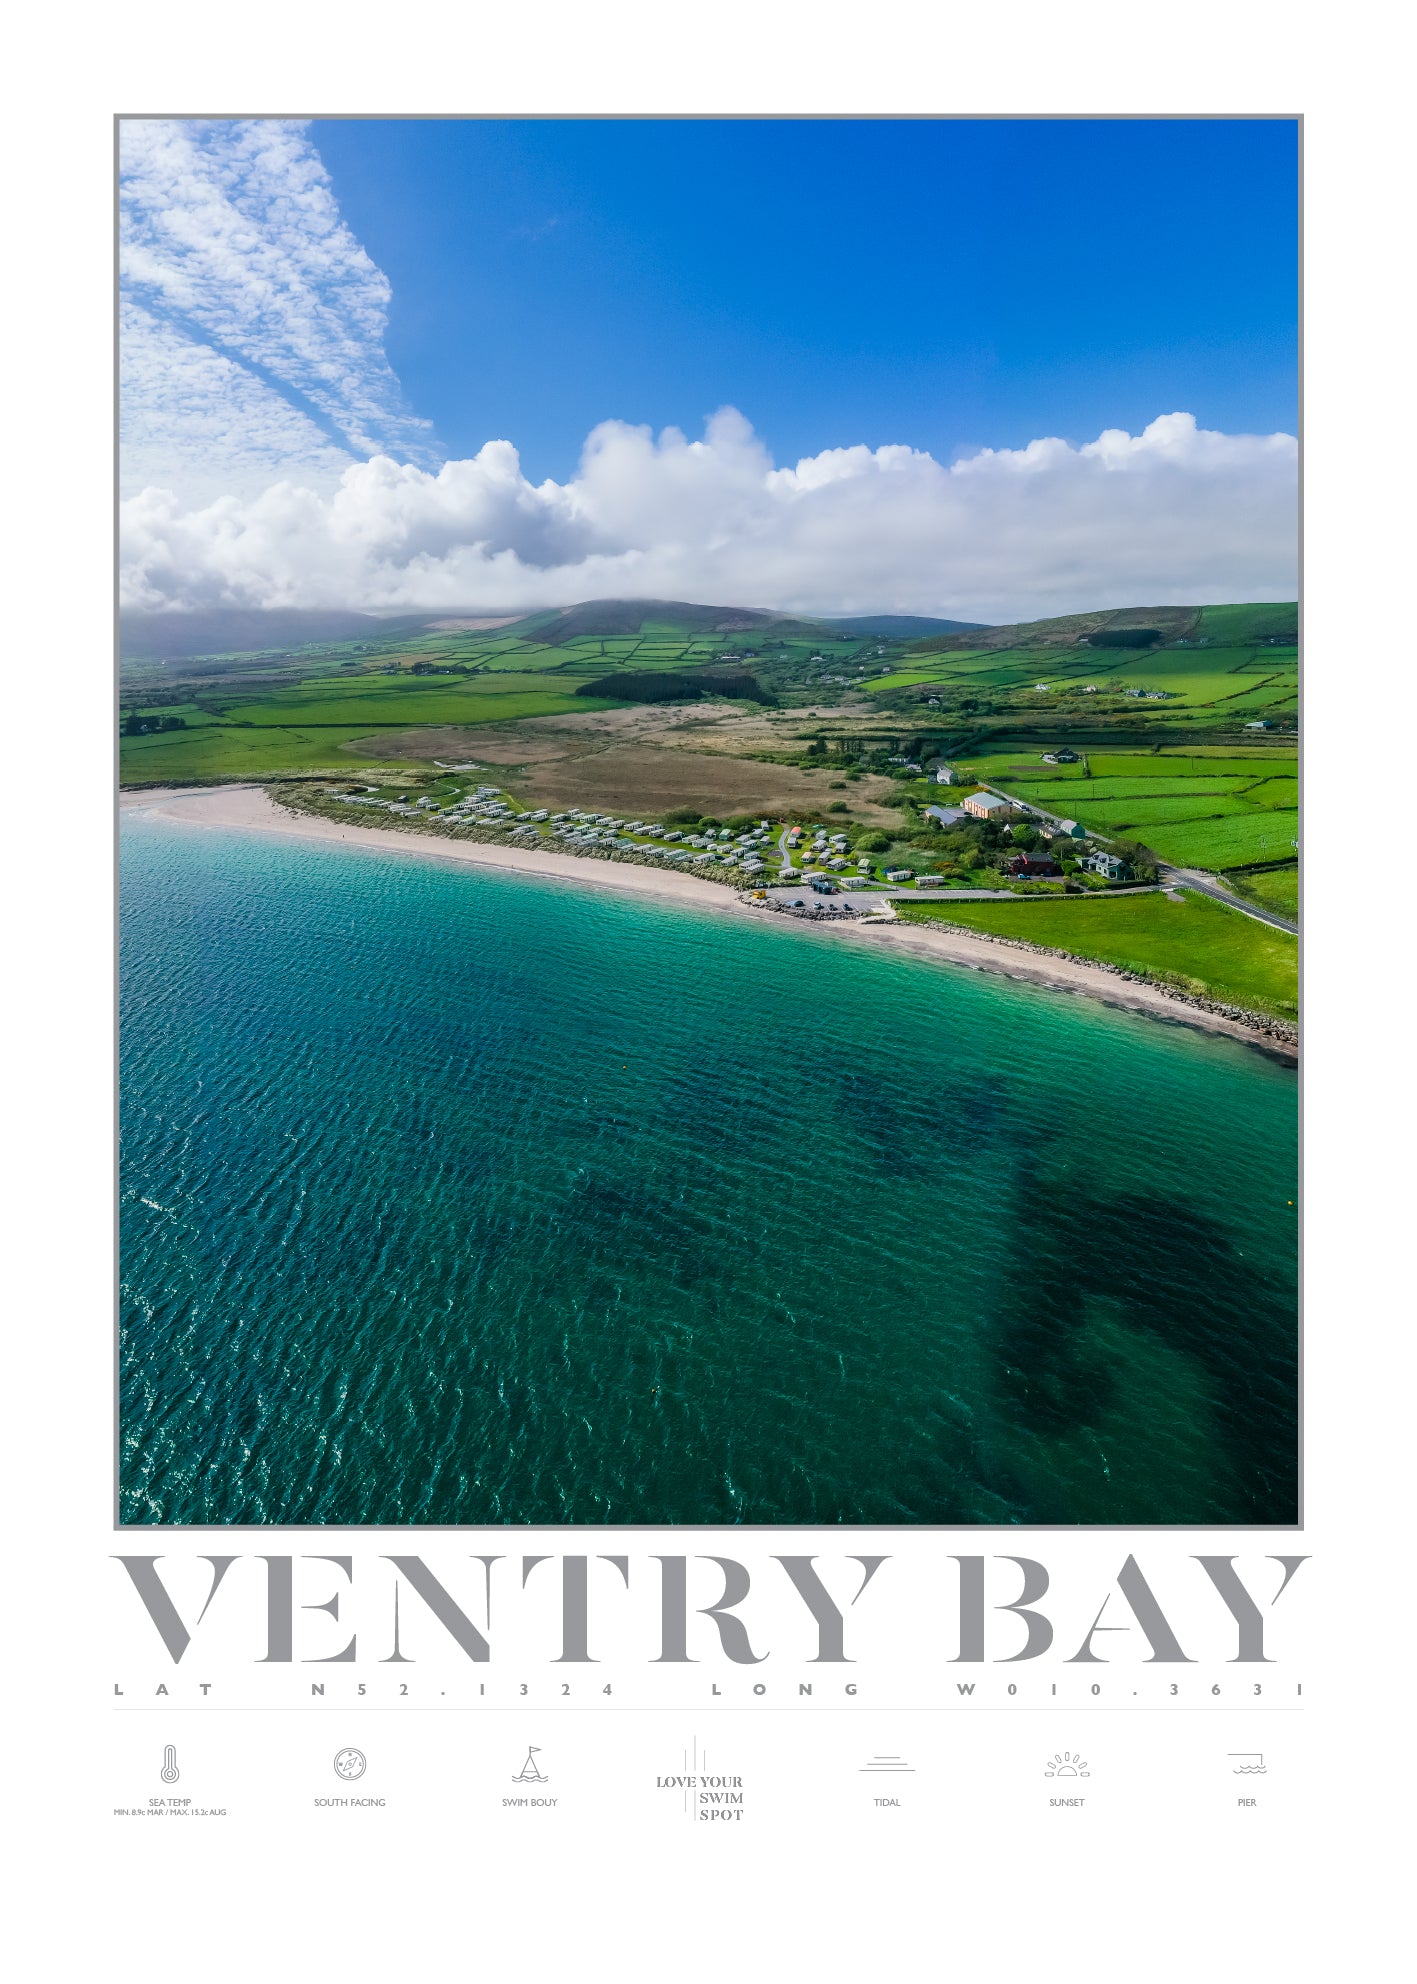 Stunning aerial photo of Ventry Bay, County Kerry, Ireland on a beautiful day.